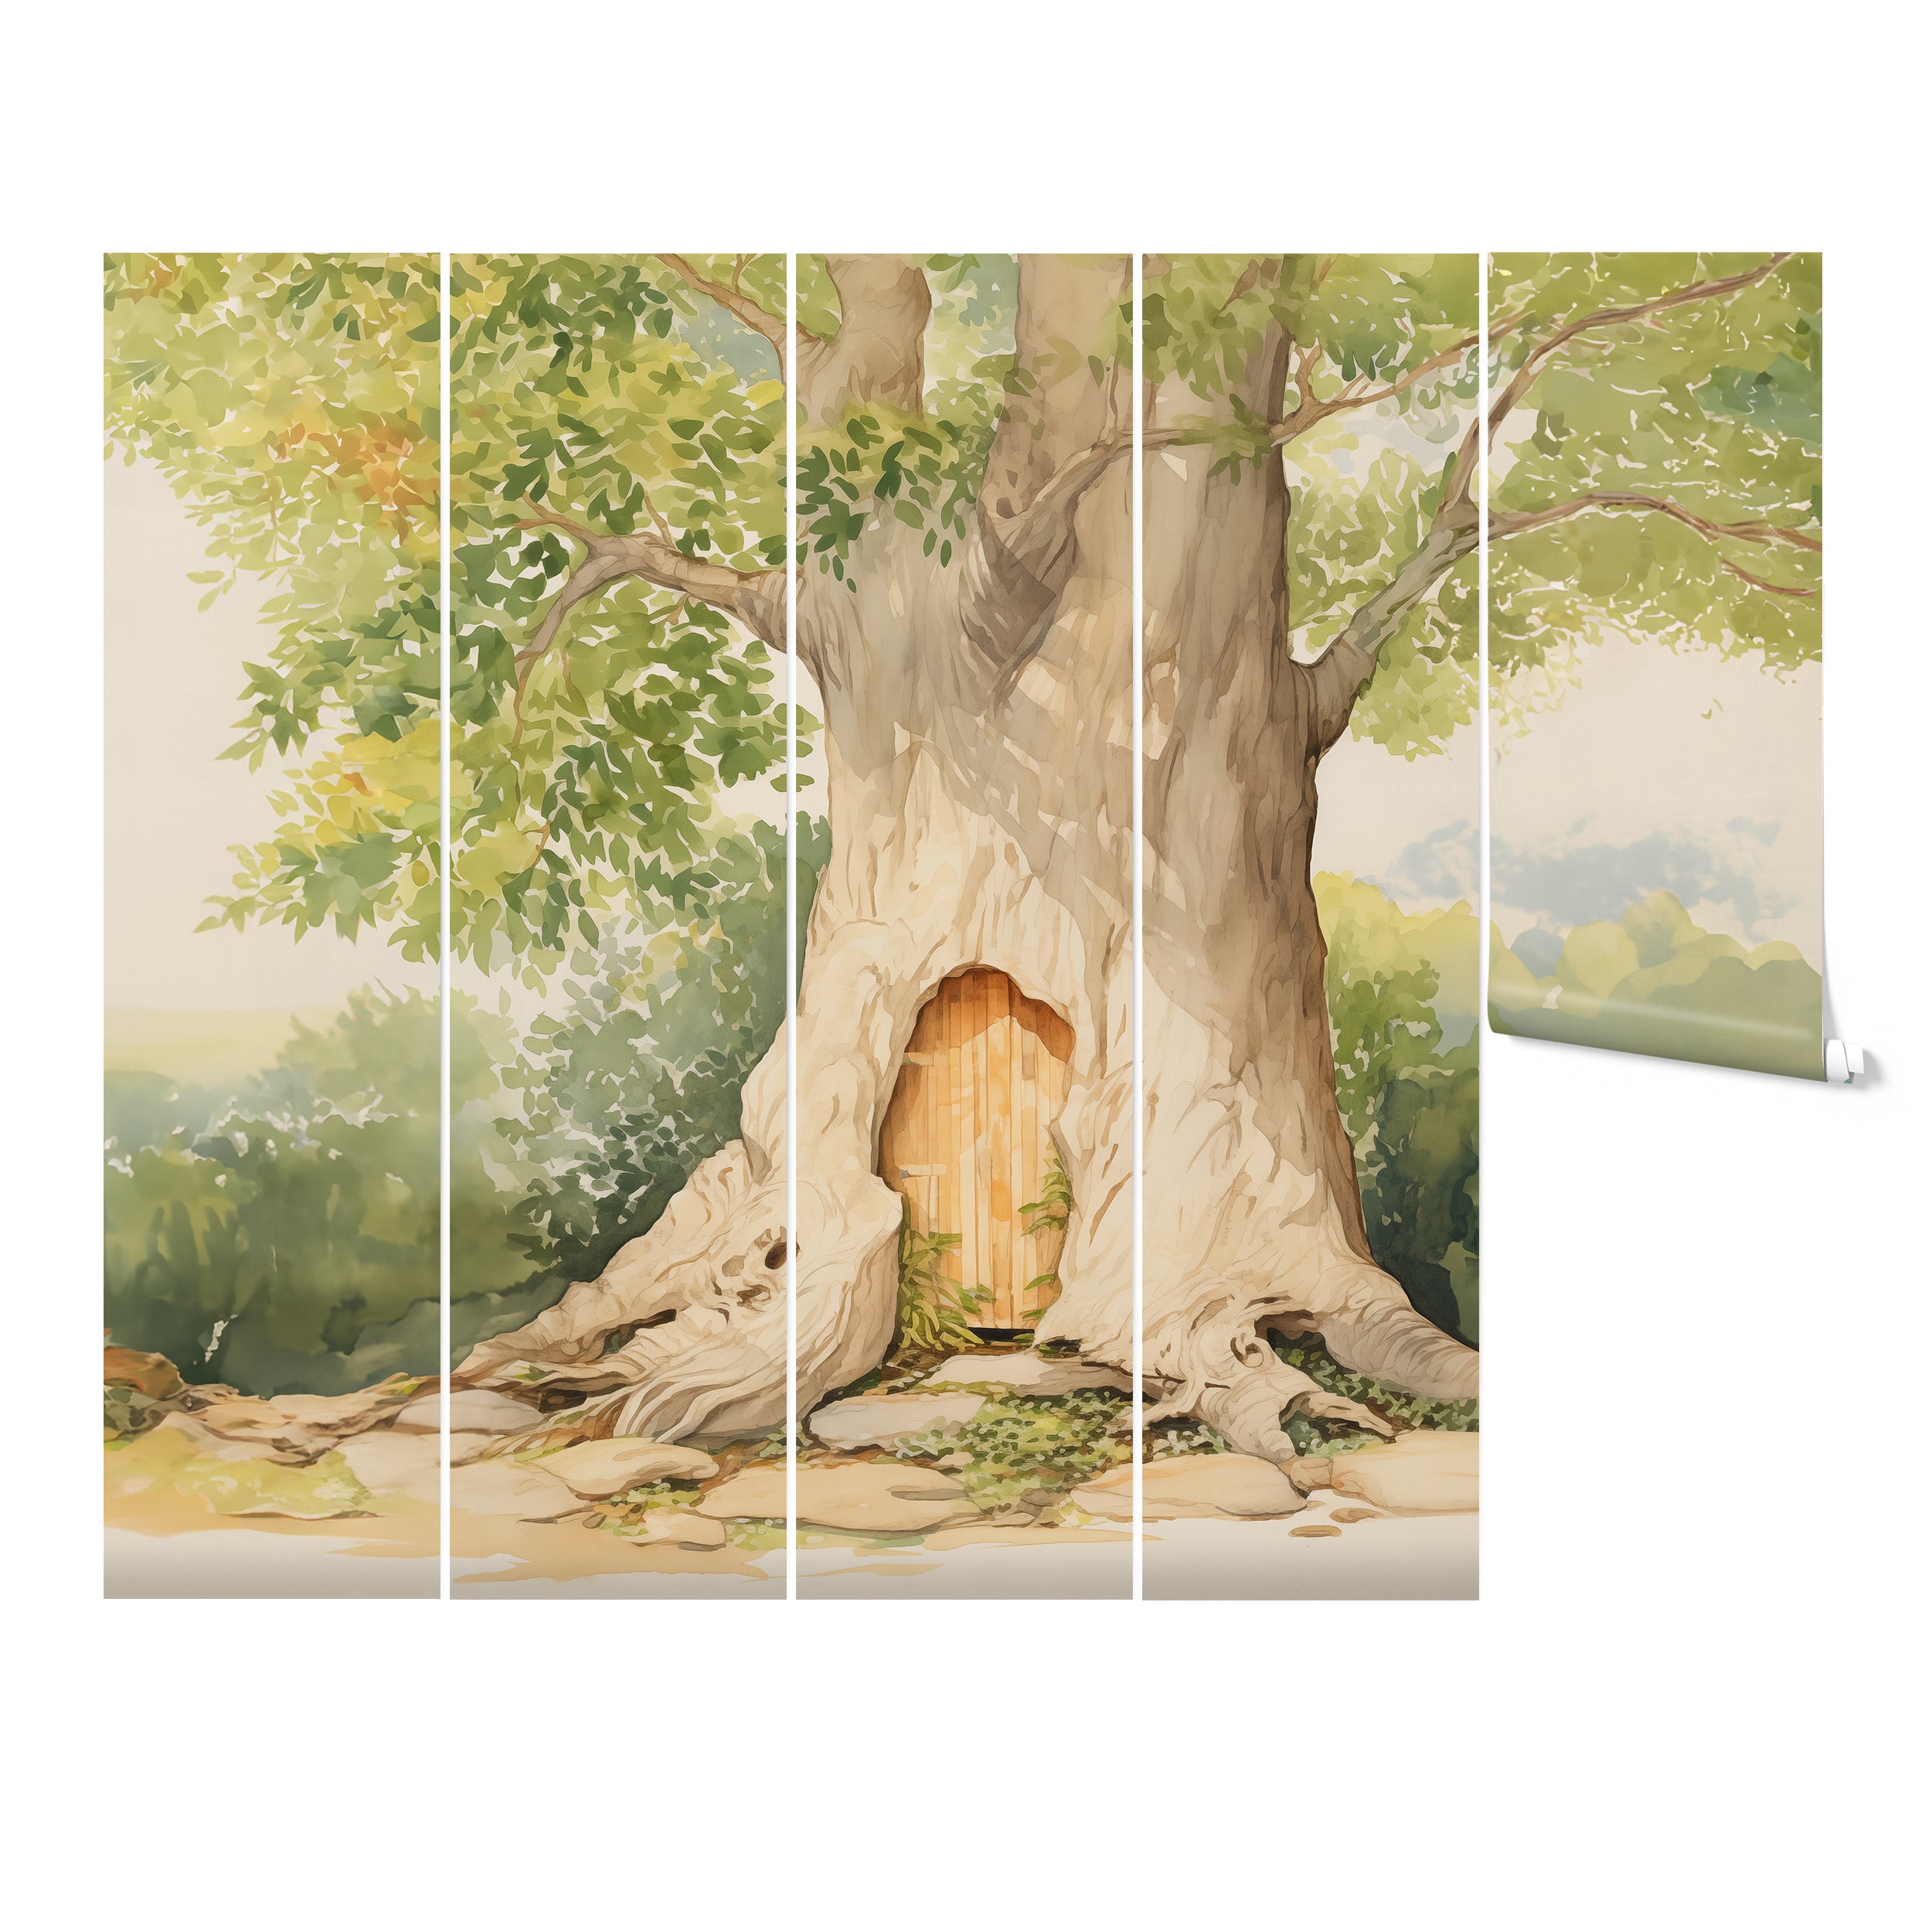 A five-panel display of a large tree mural with a whimsical door at its base, suggesting the house of Winnie the Pooh, surrounded by lush green foliage and a serene backdrop.